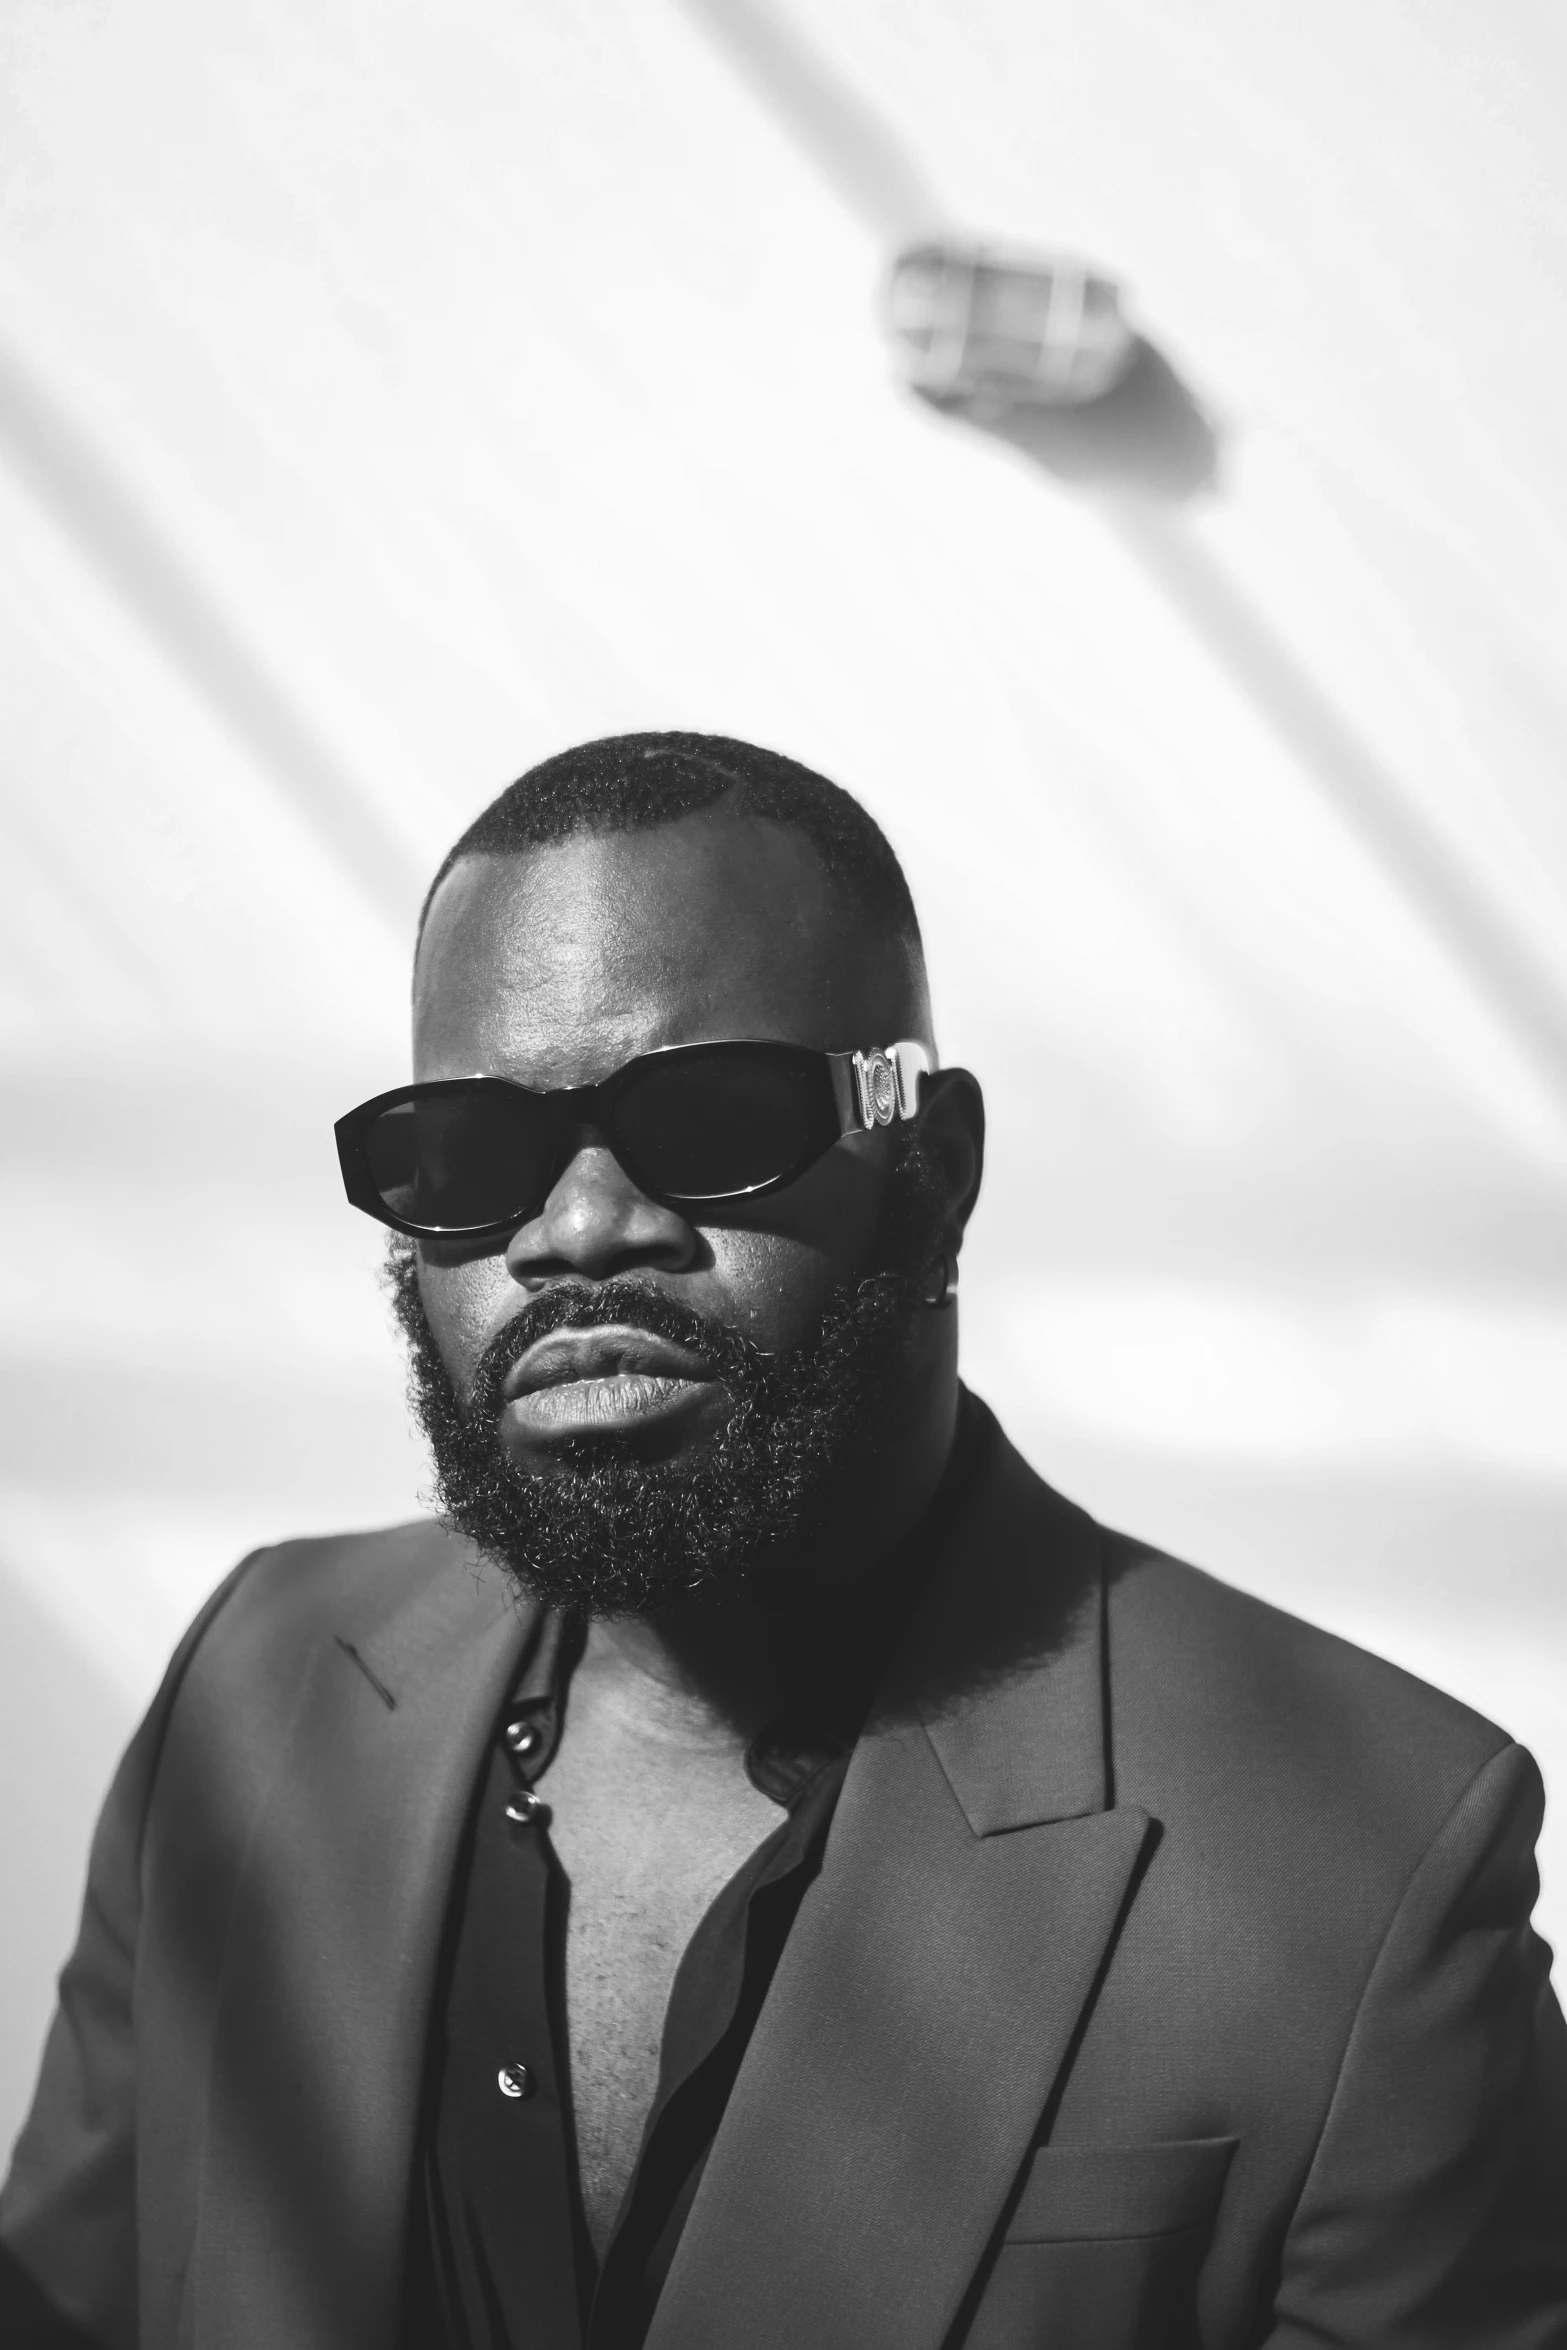 a black man wearing sunglasses and suit jacket